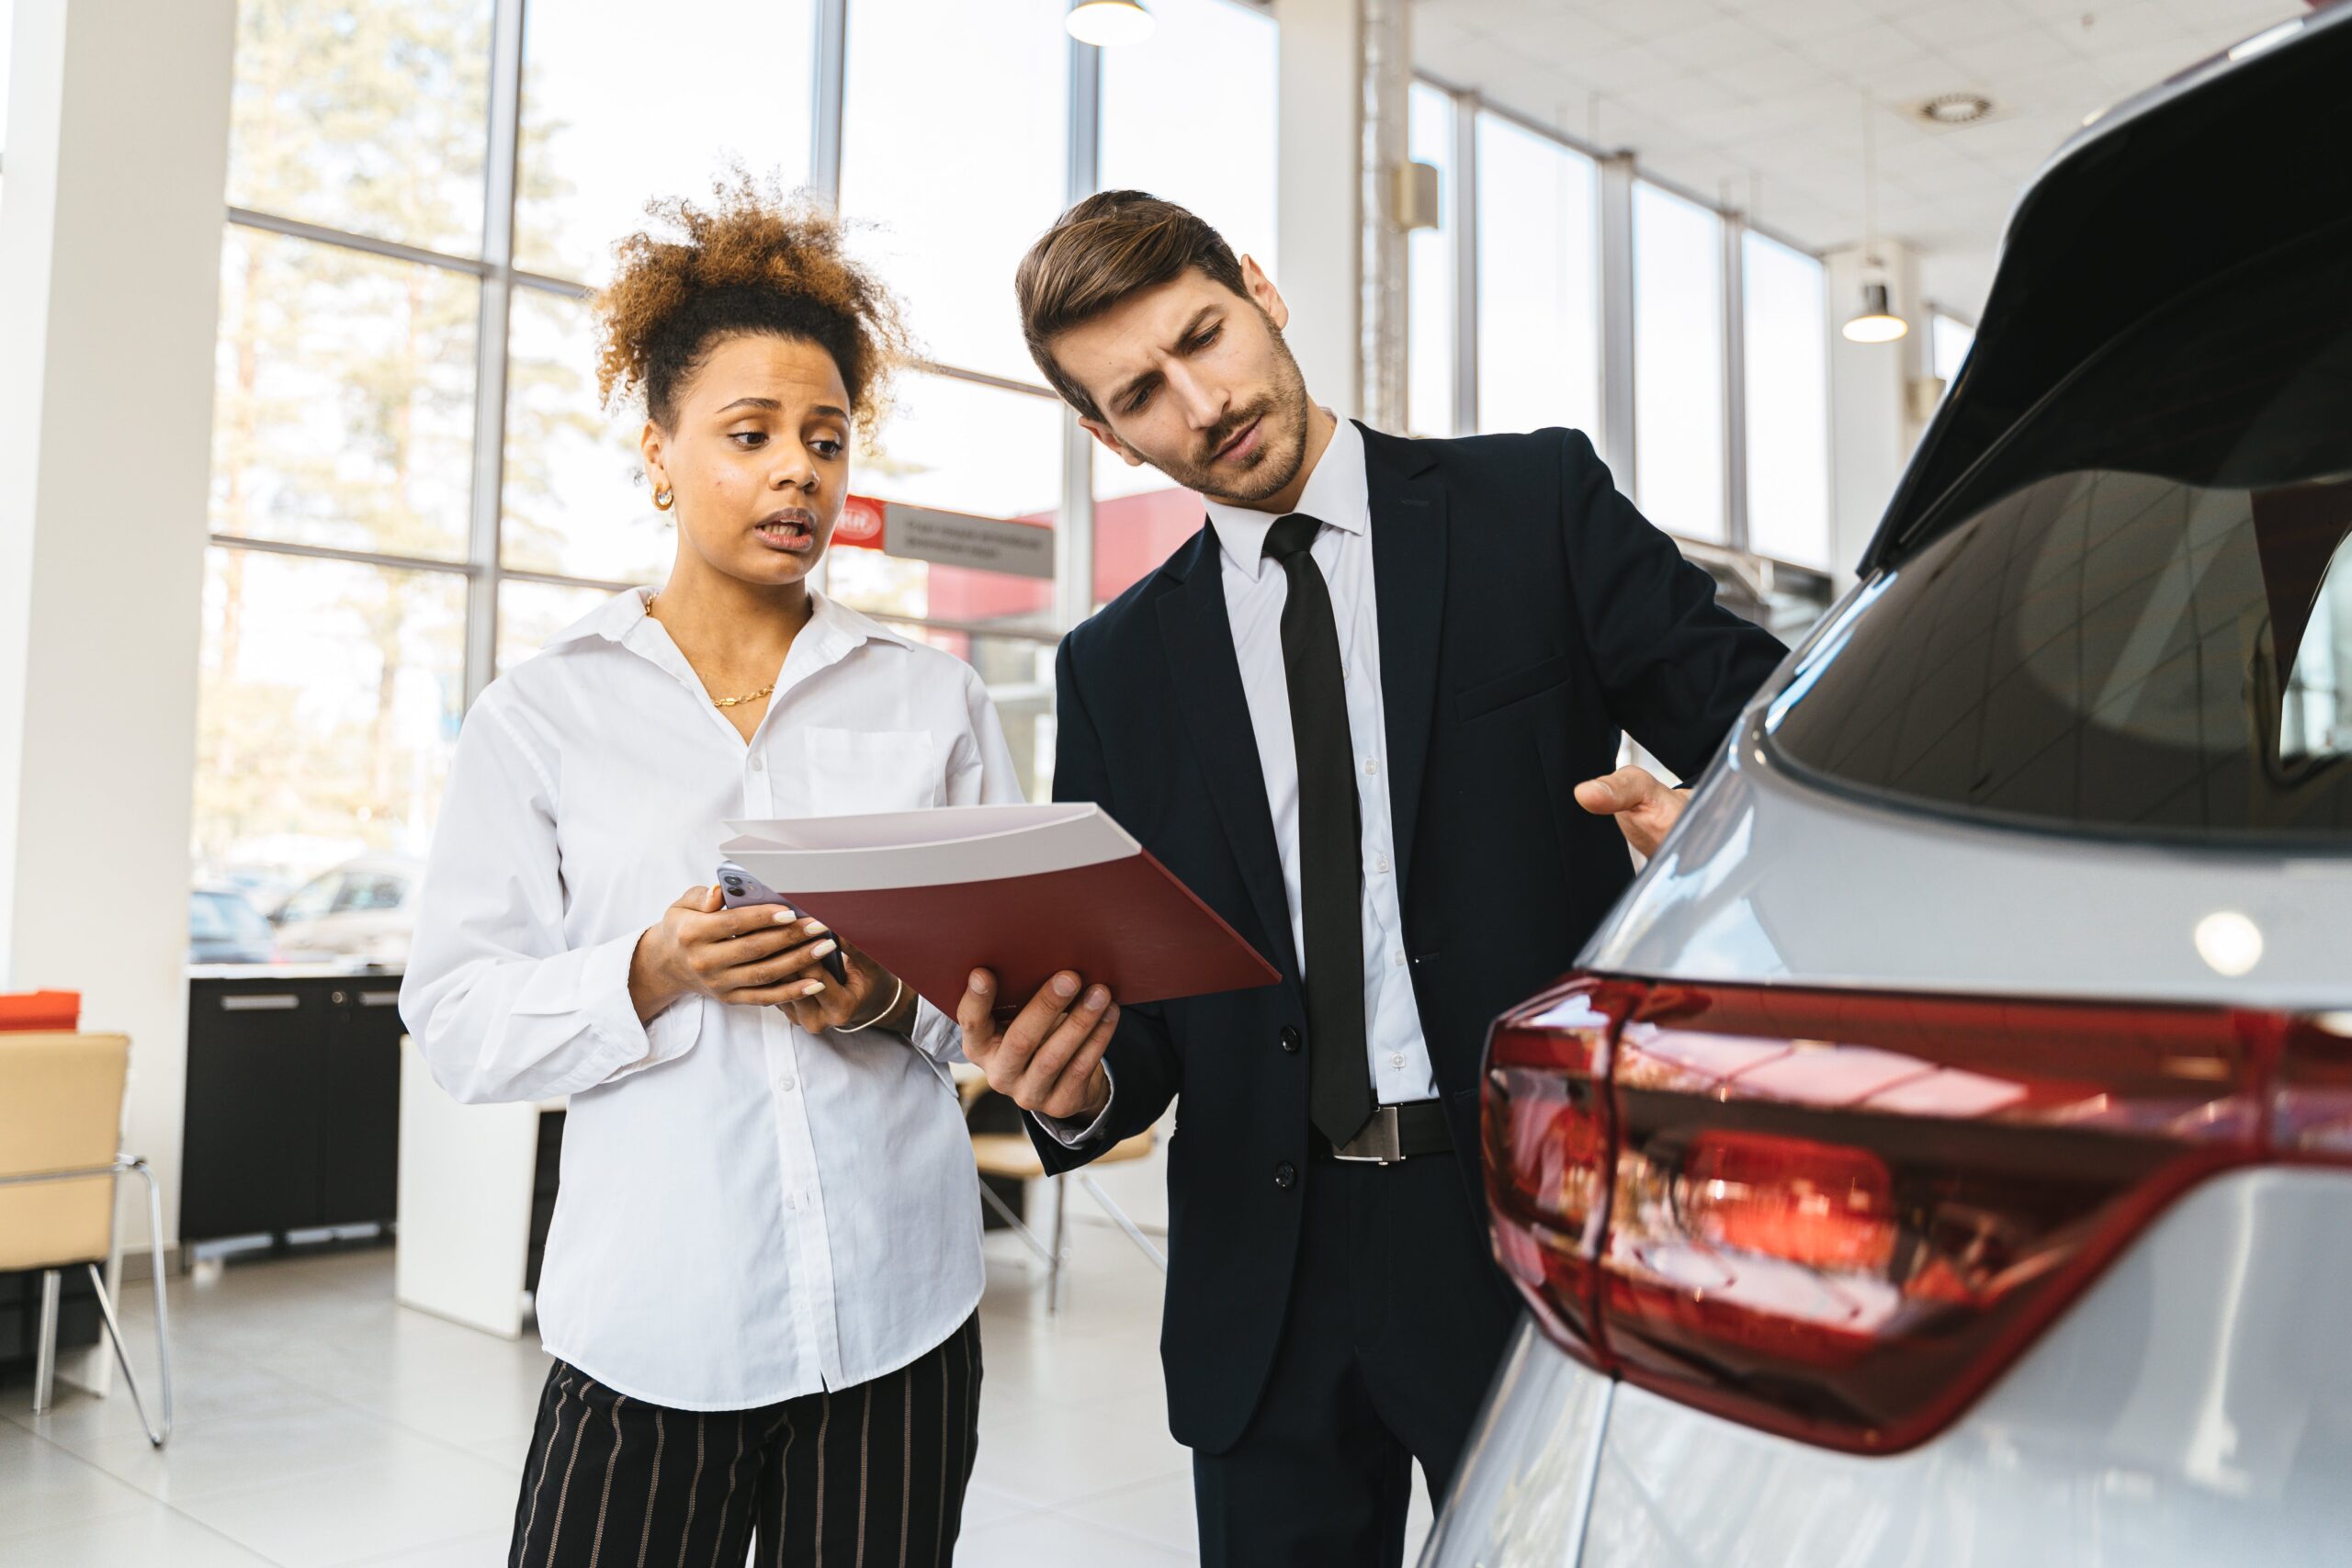 Finding a Fair Price How to Check Market Value Before Buying a Car